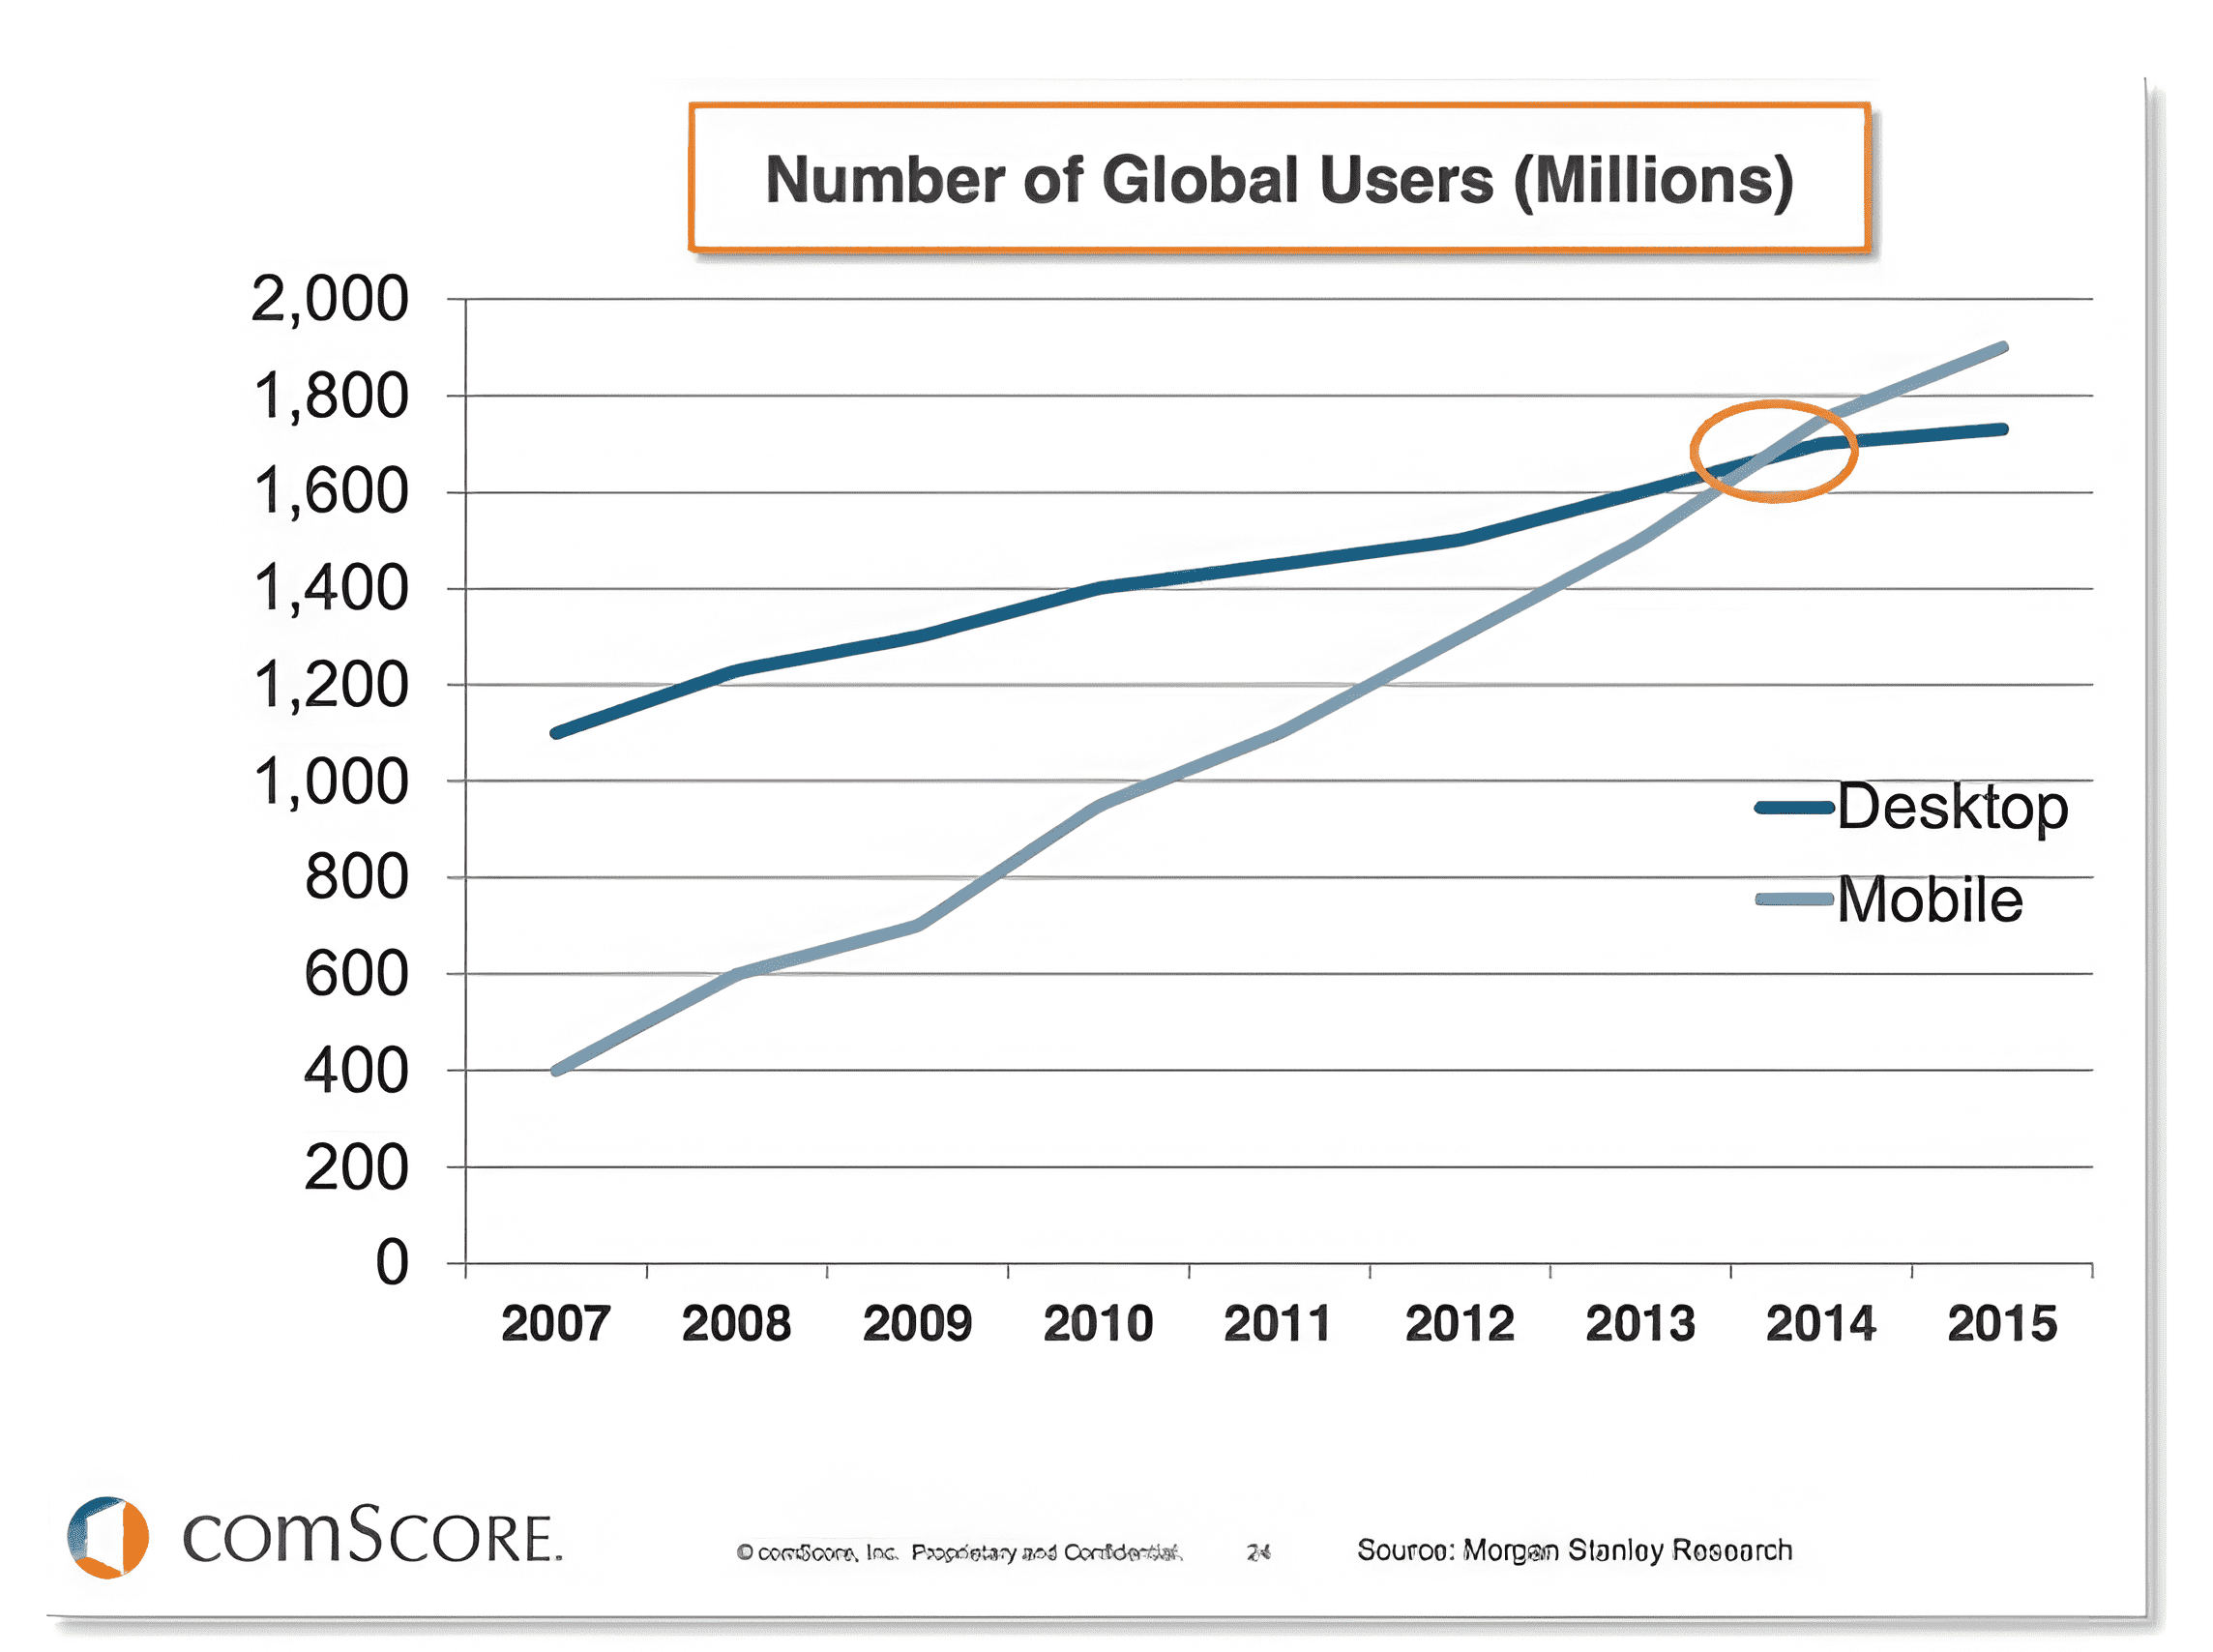 Graphic of Number of Global Users of Mobile and Desktop